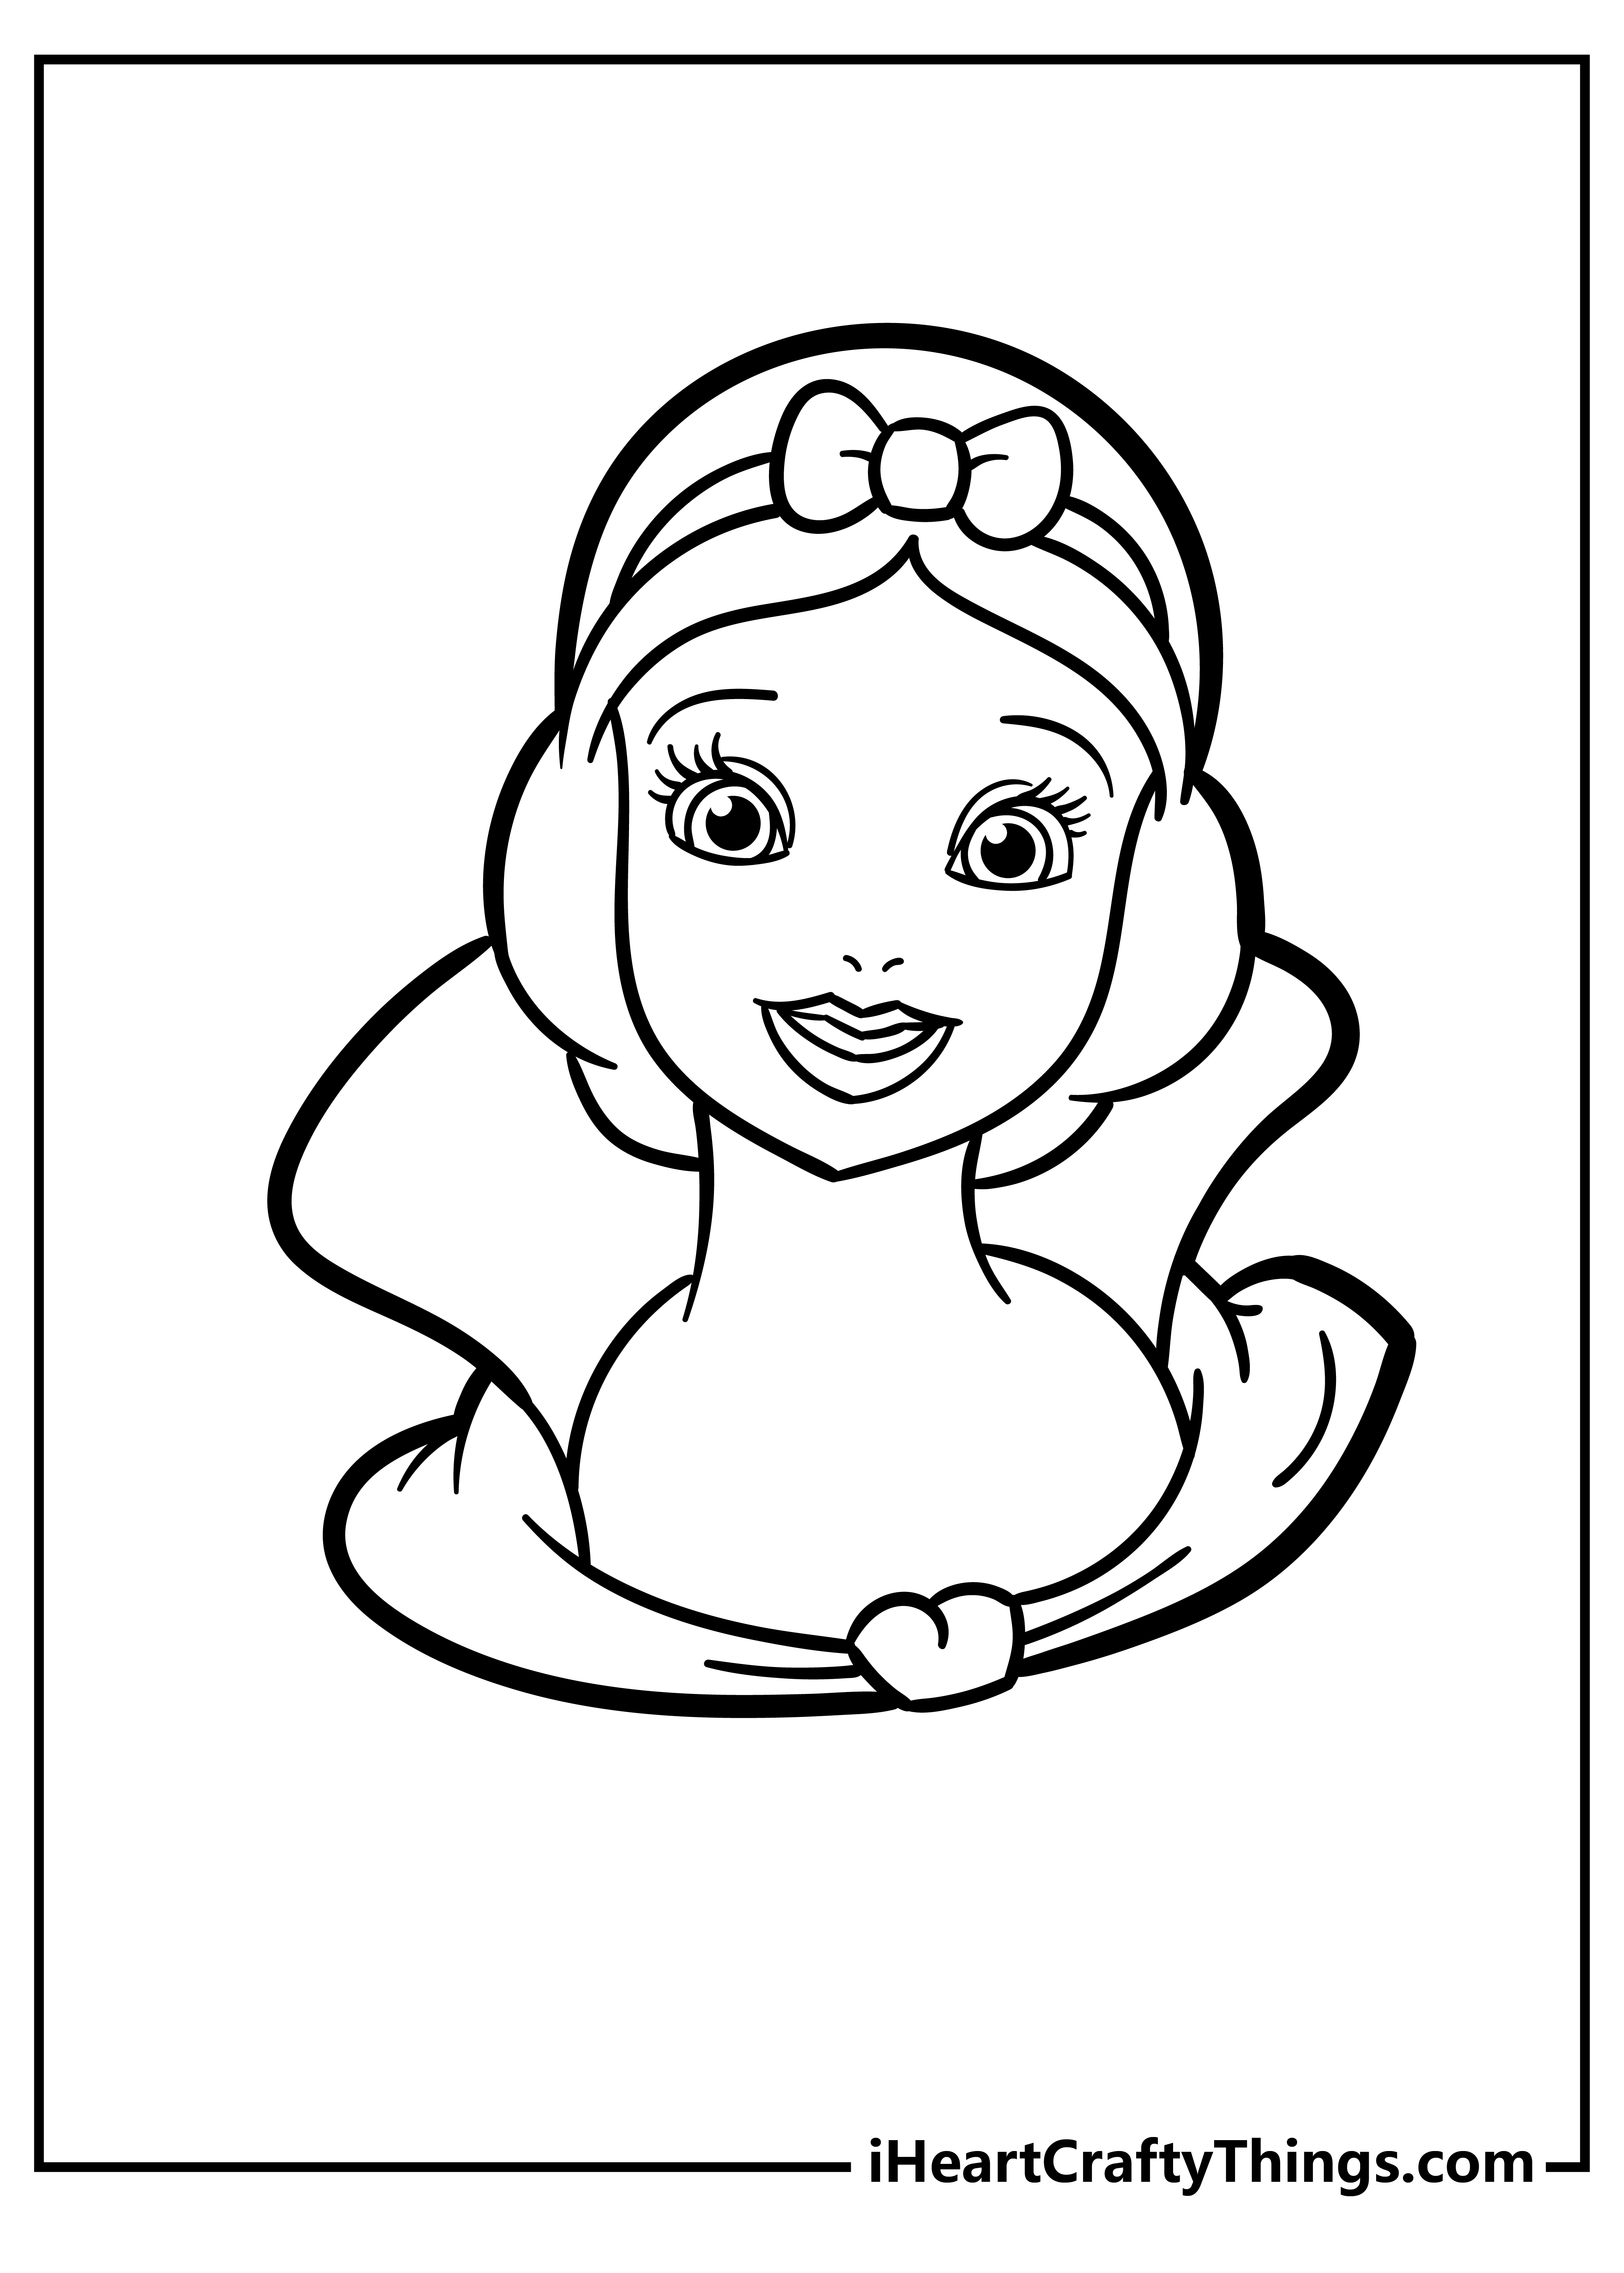 Snow White Coloring Book for kids free printable